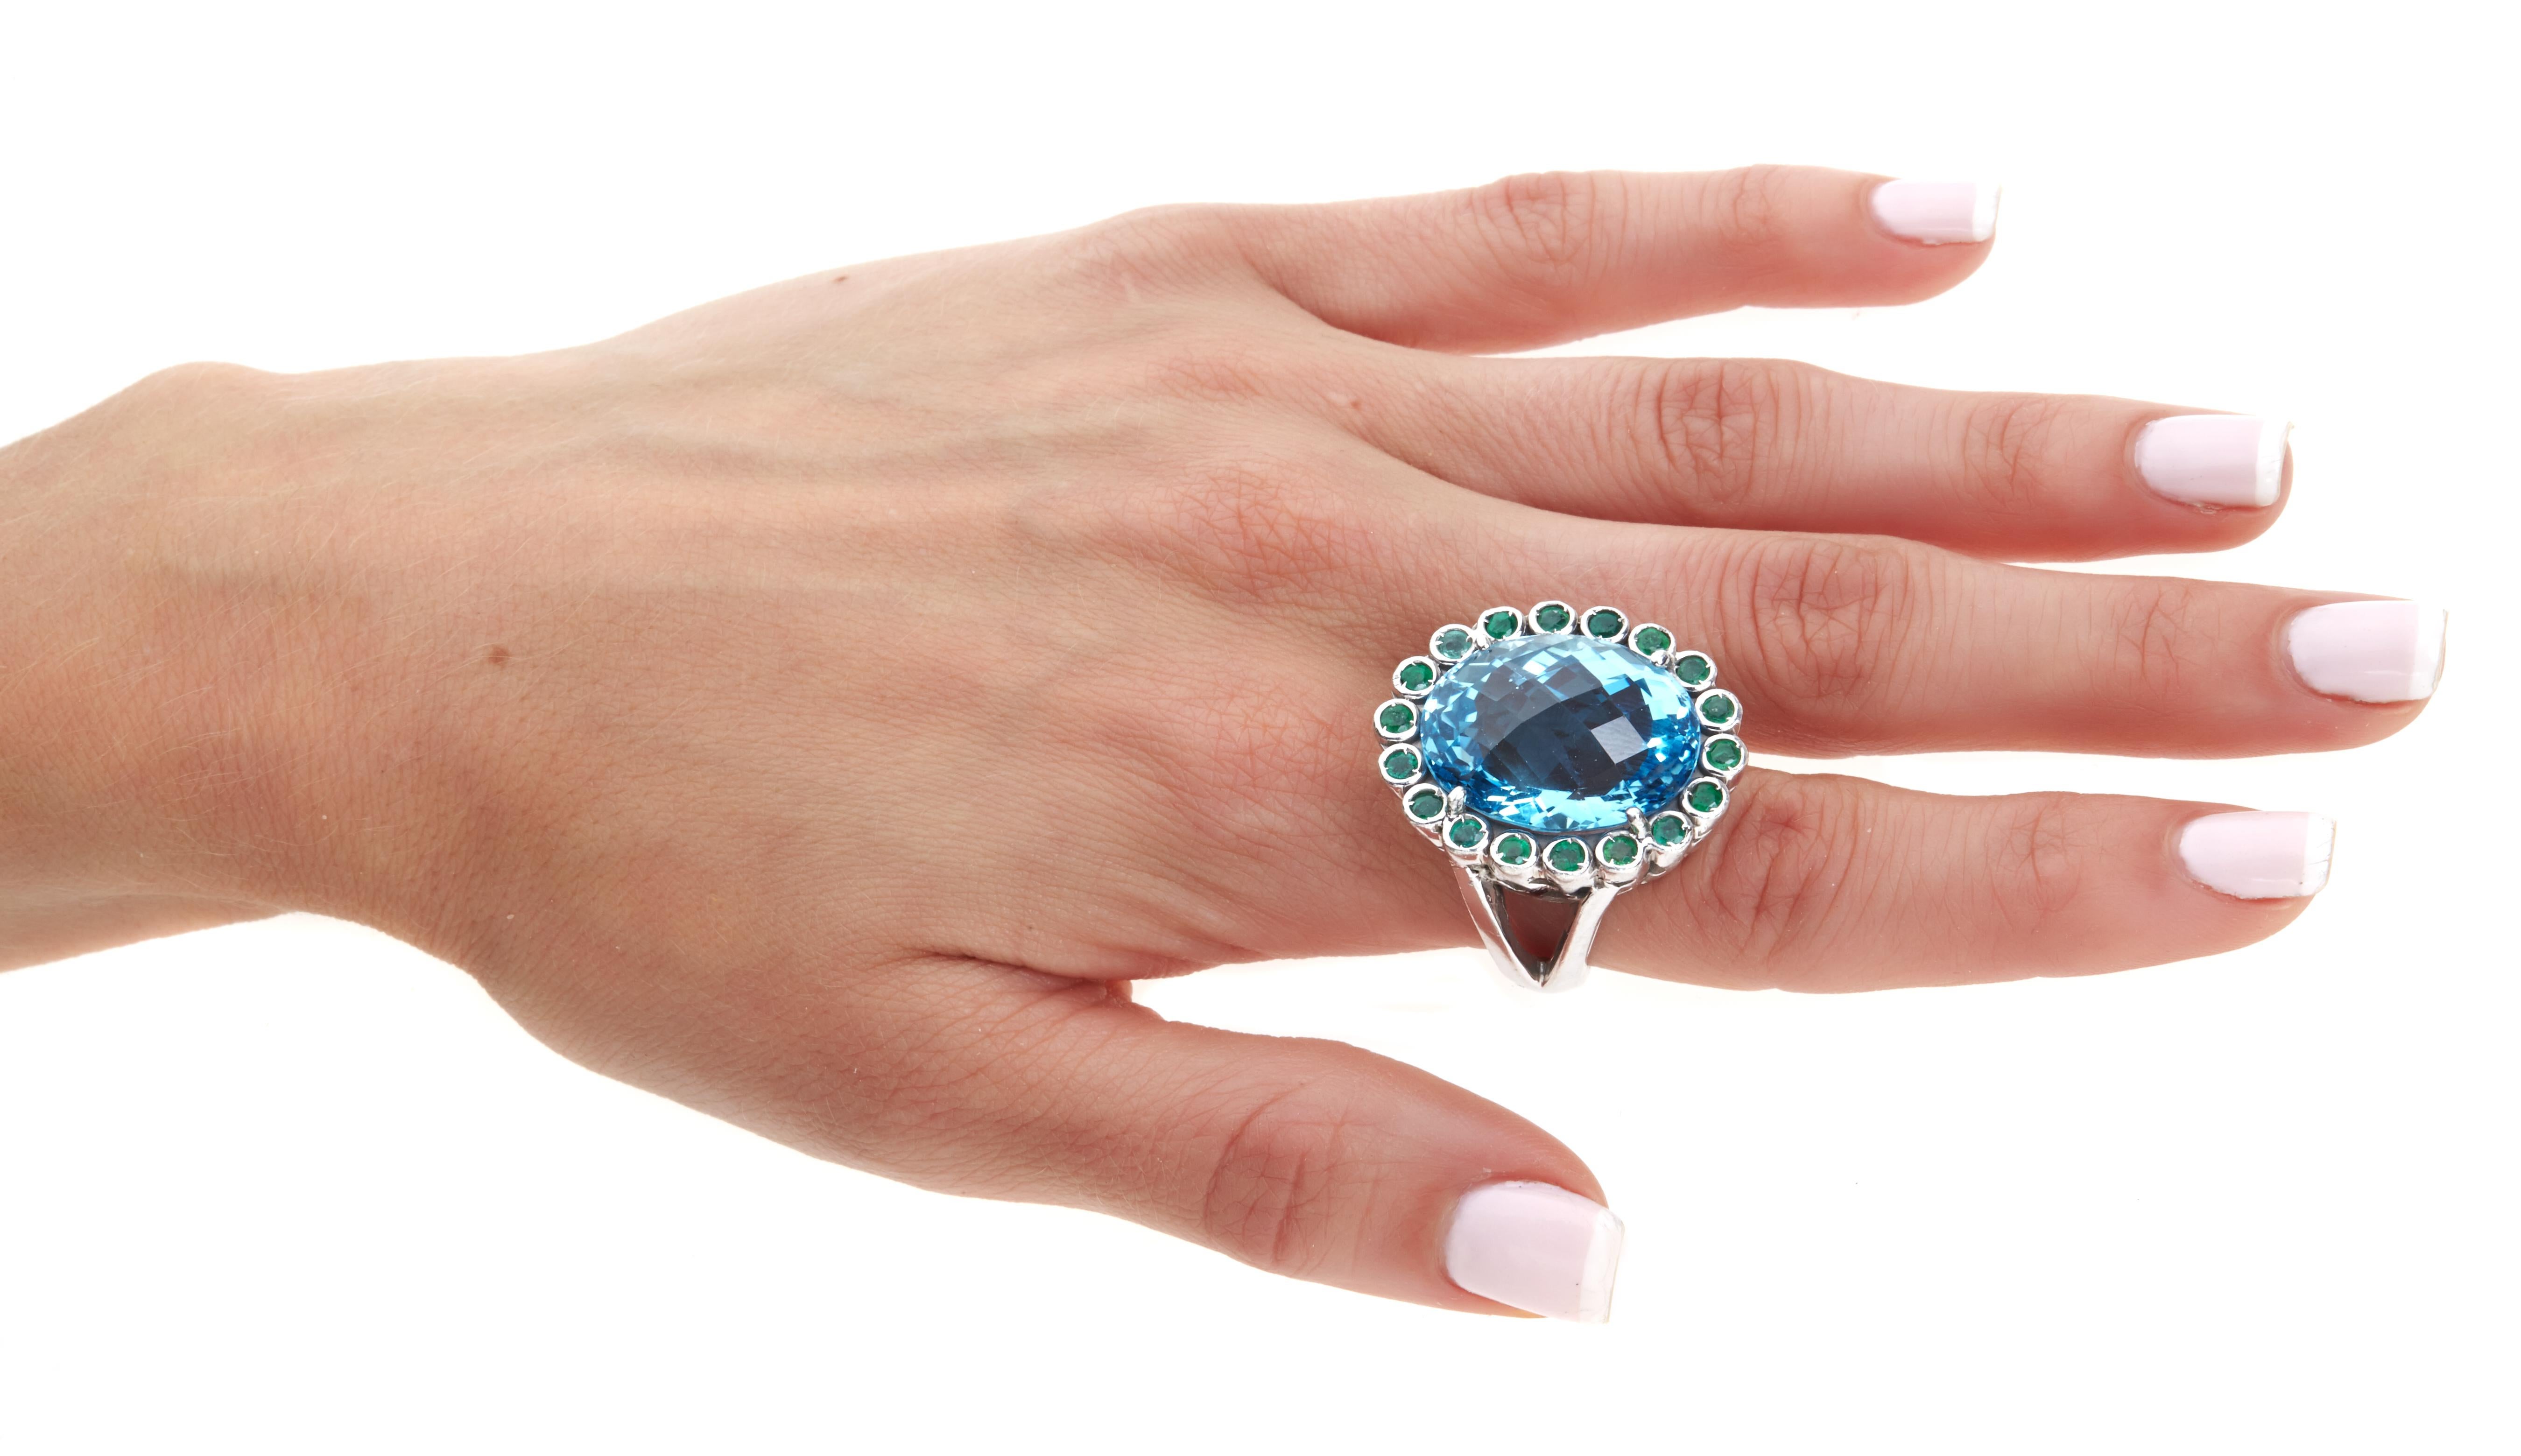 Sabrina Balsky Jewelry
One of a Kind 33.50 Sparkling London Blue Topaz Cocktail Ring surrounded by Bezel set Columbian Emeralds in signature design in Rhodium Plated Sterling 1-3/16